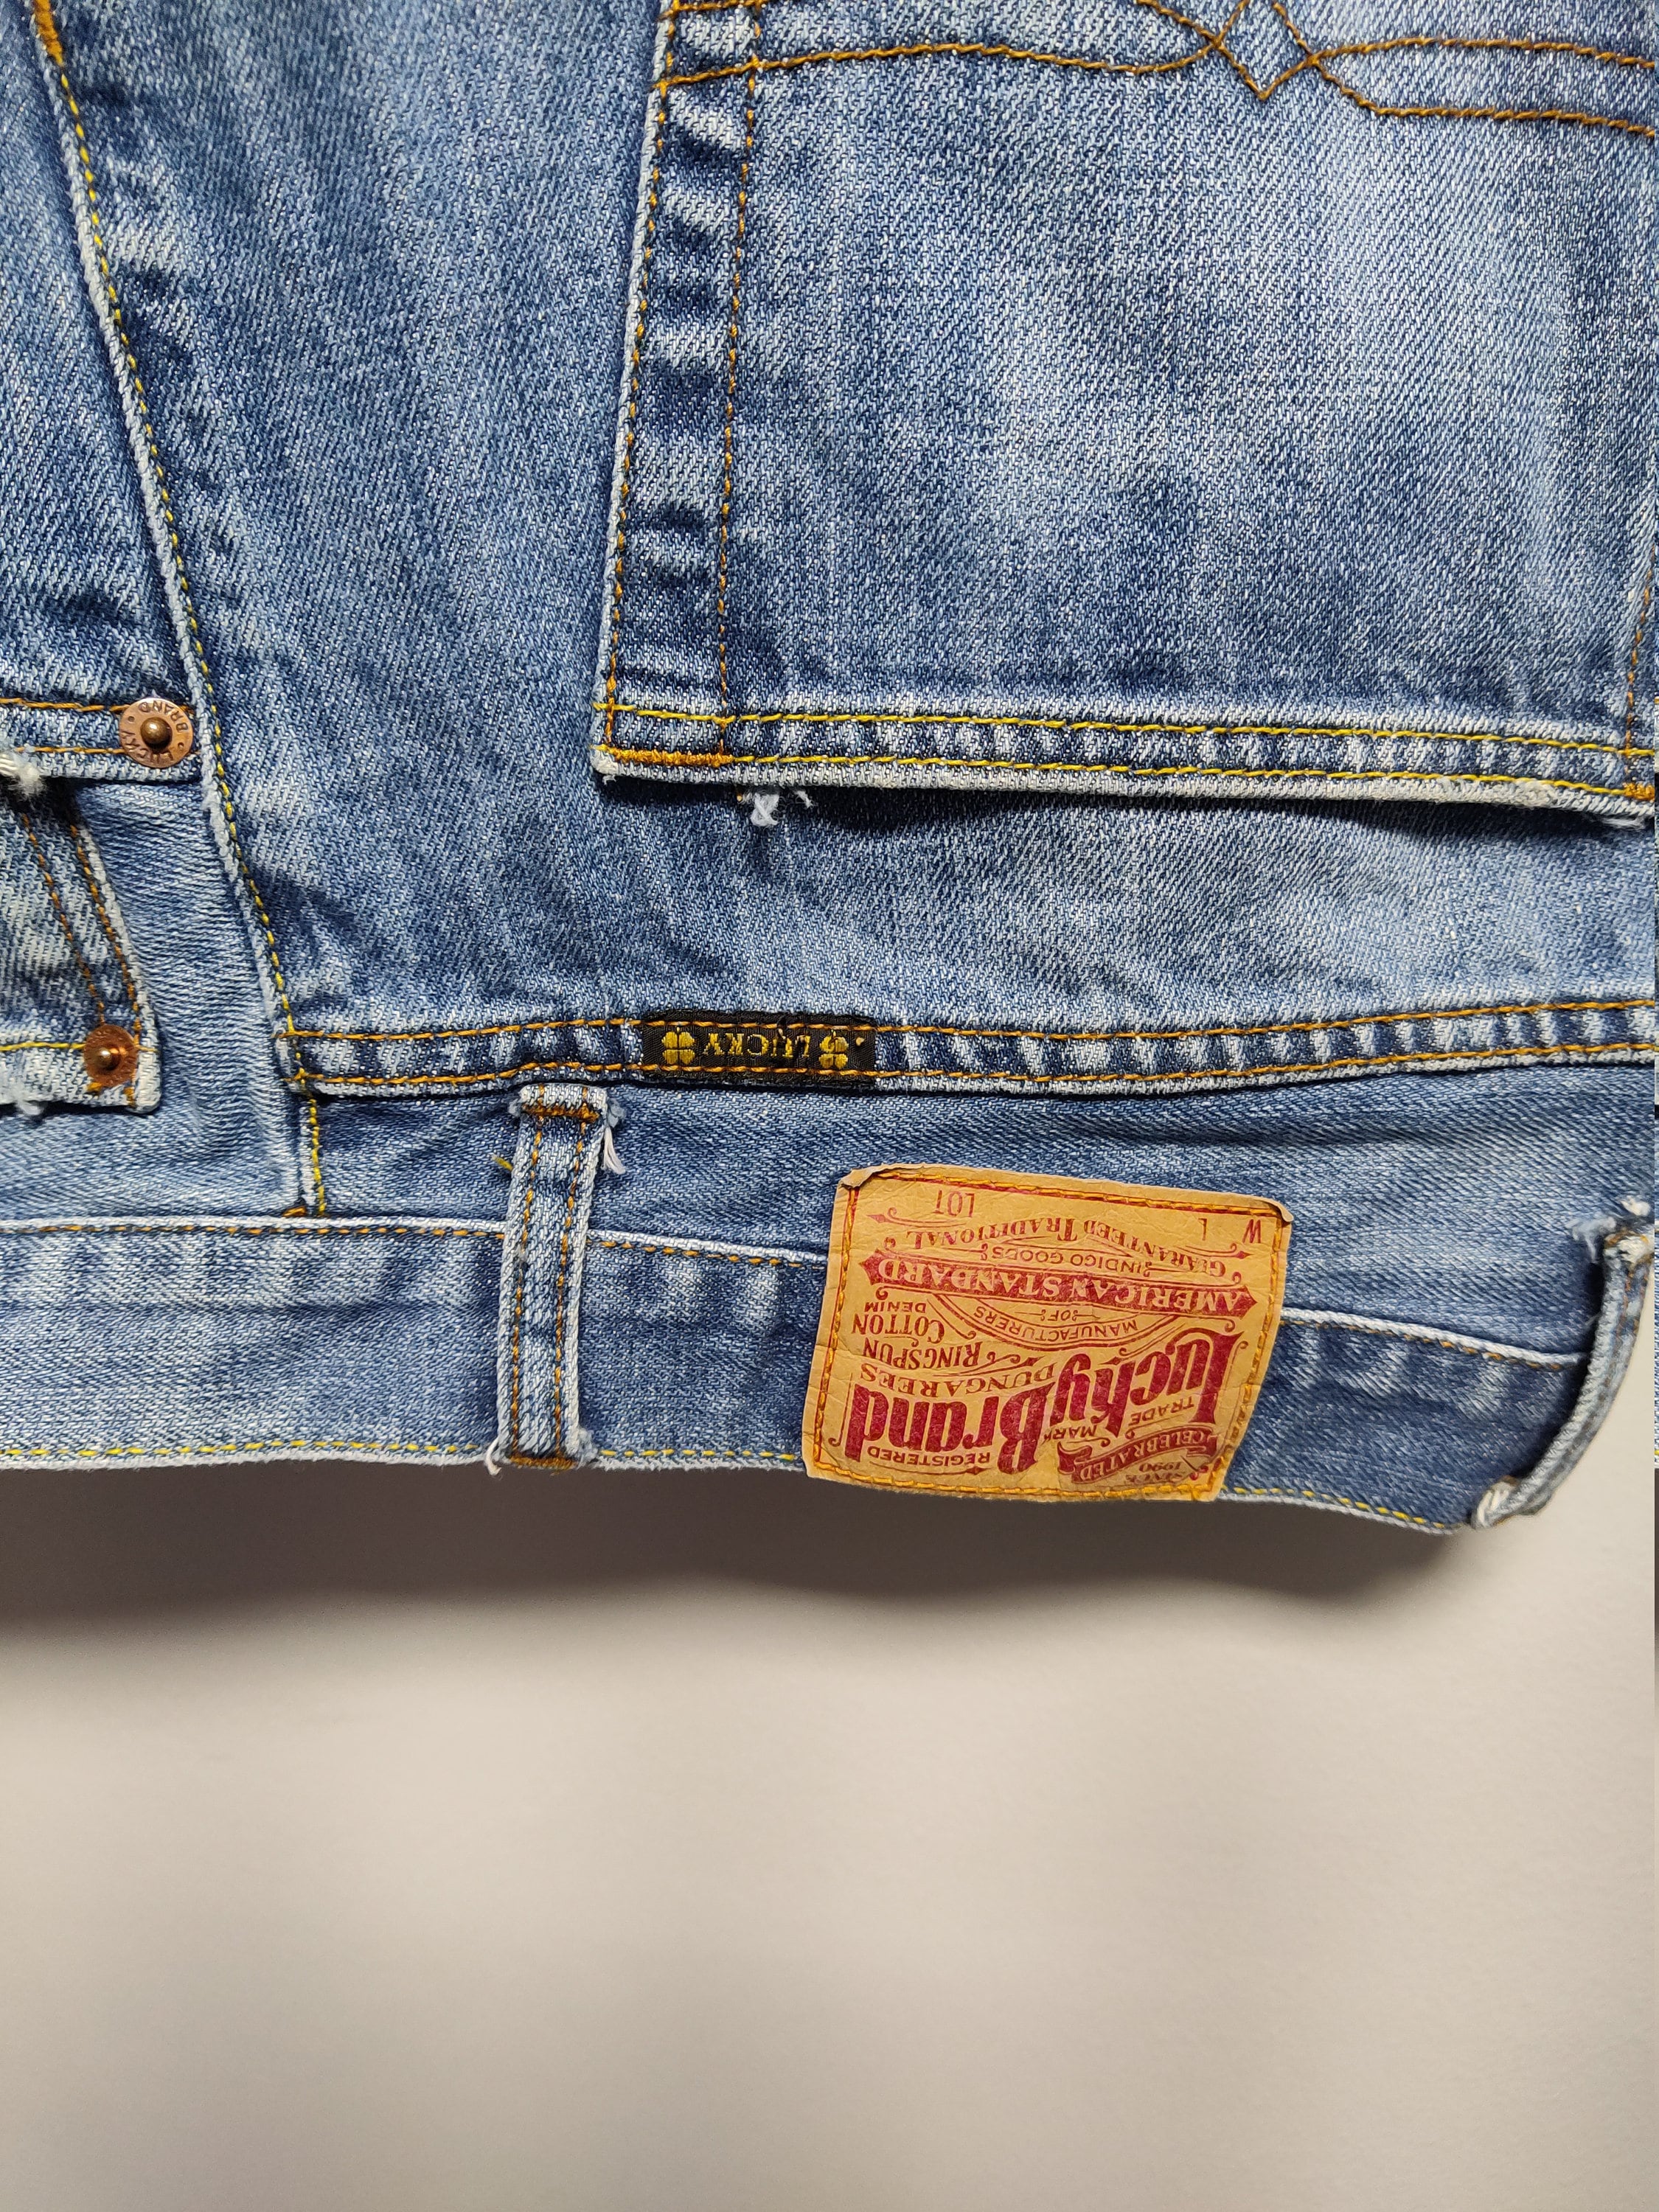 Vintage Jeans by LUCKY BRAND 100% Cotton -  Canada